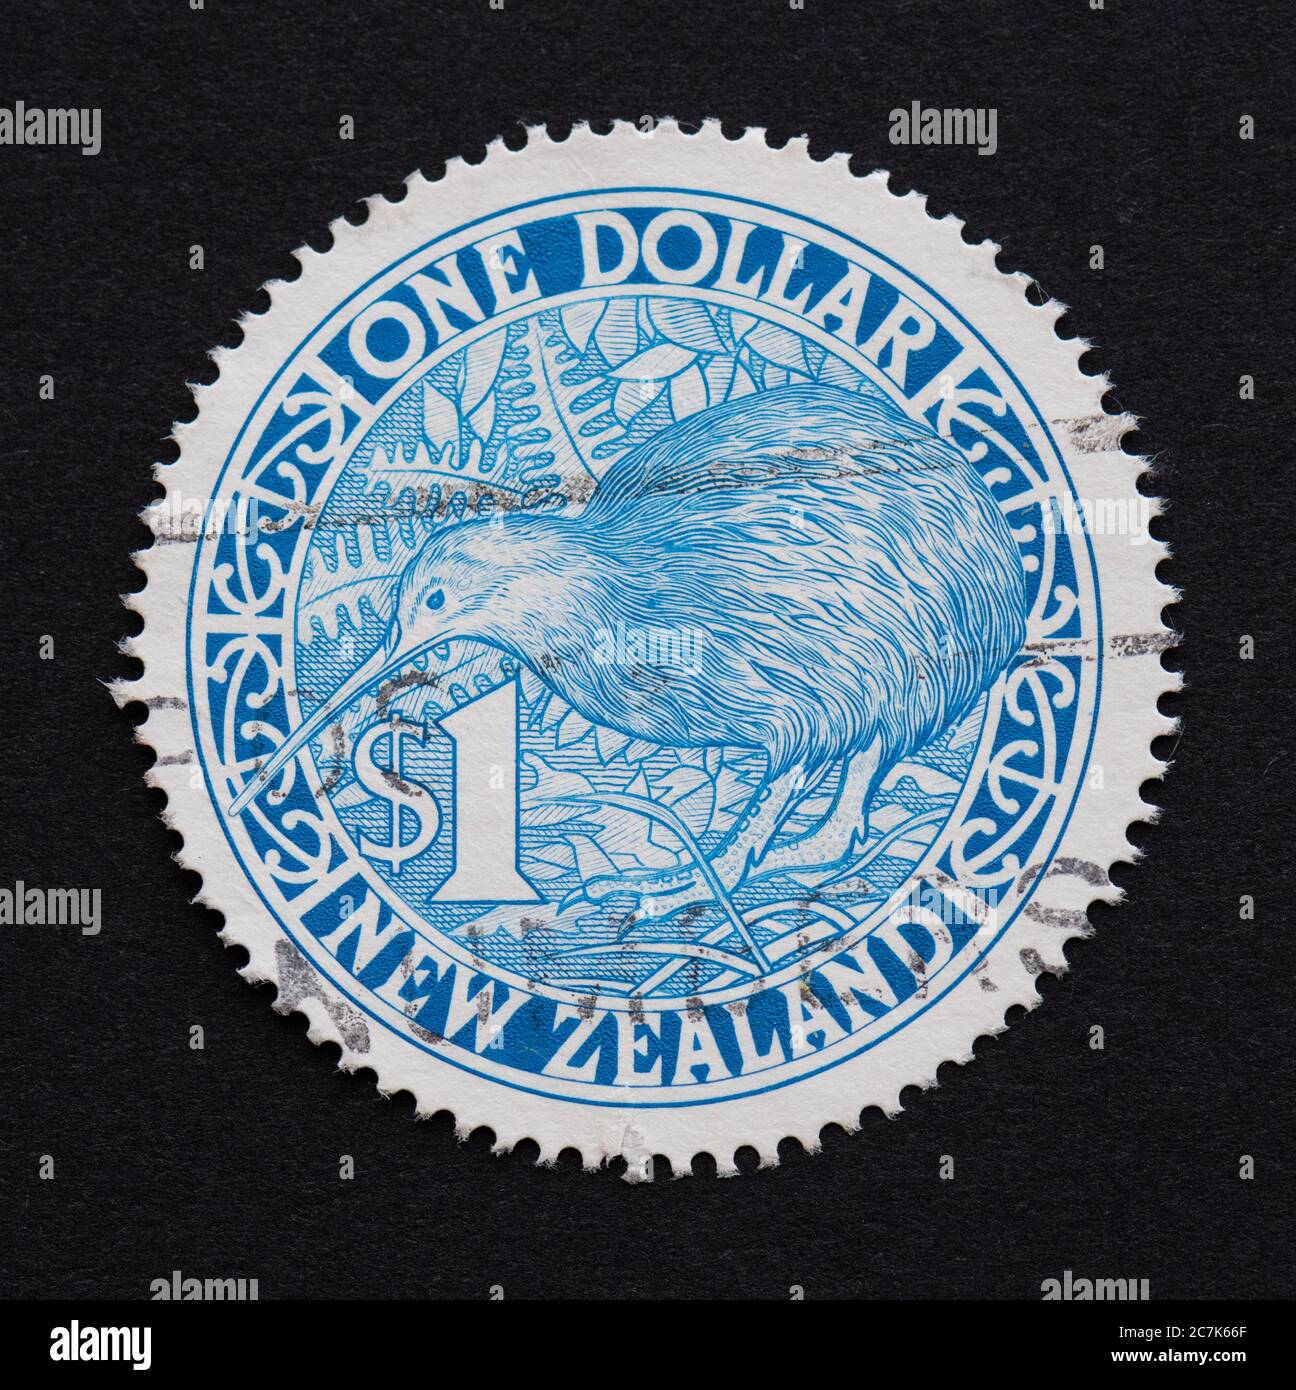 Circular postage stamp - New Zealand Kiwi $1 issued in 1993 Stock Photo